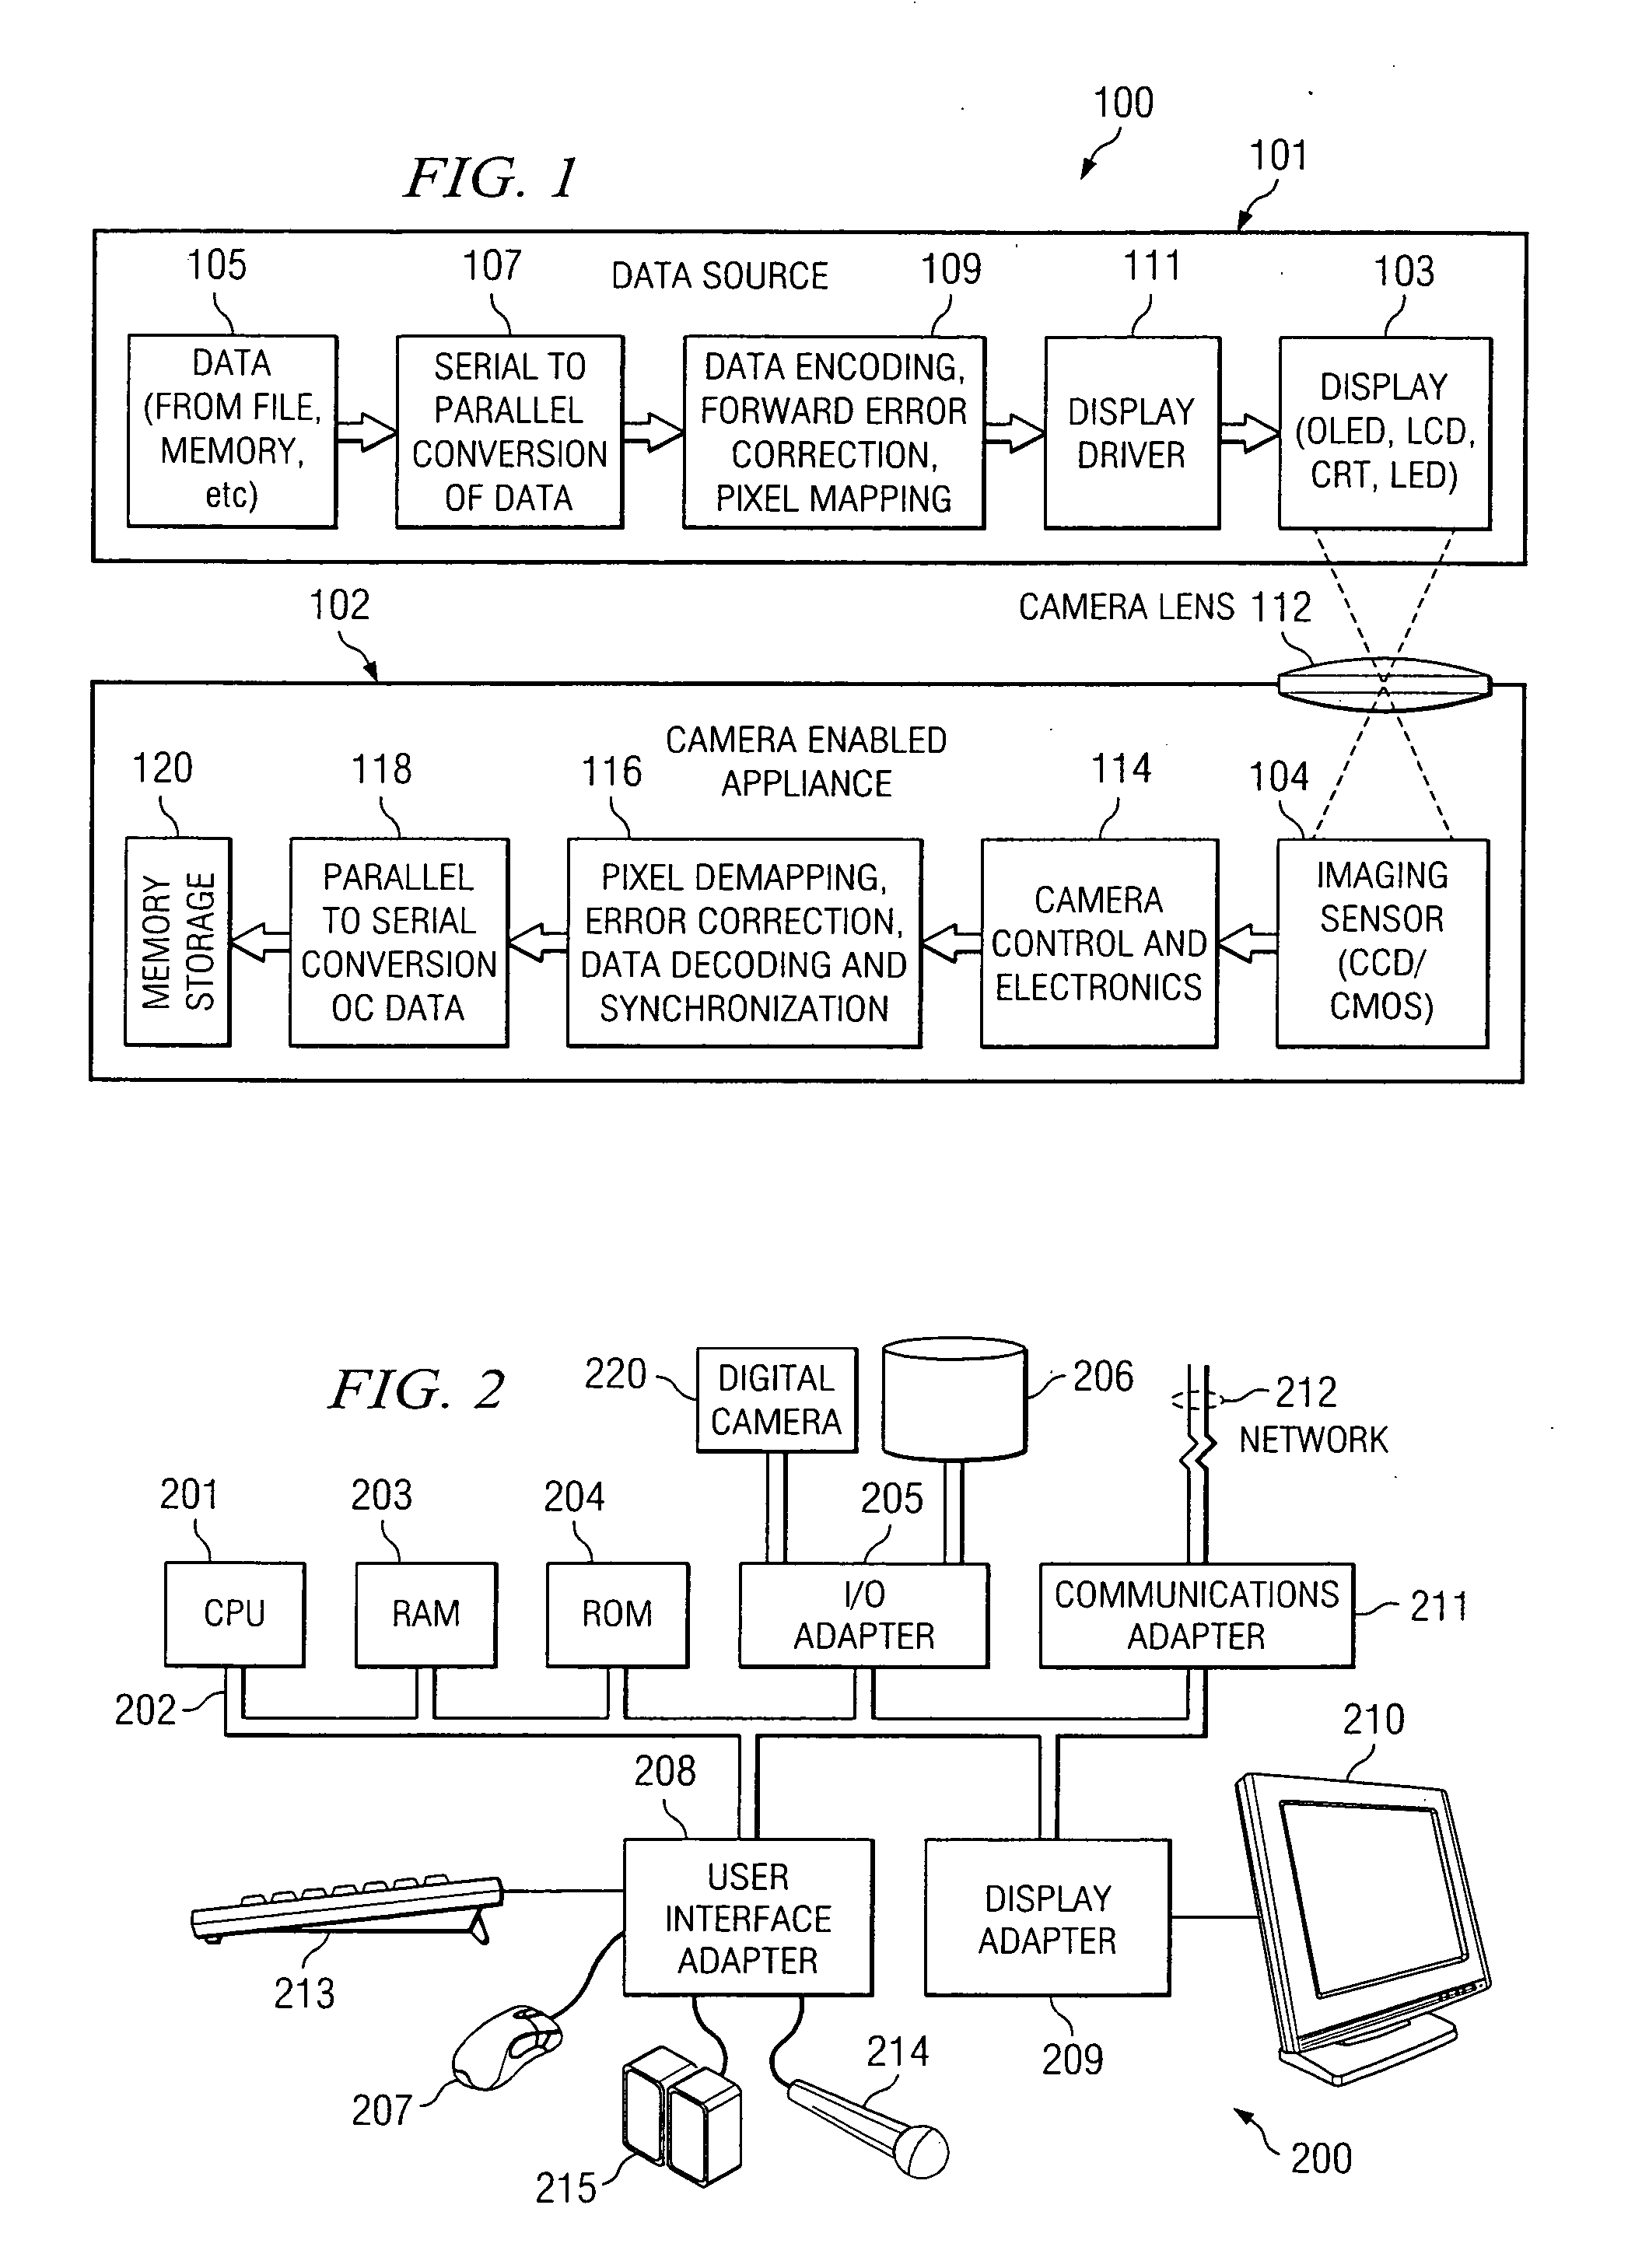 Systems and methods for data transfer with camera-enabled devices